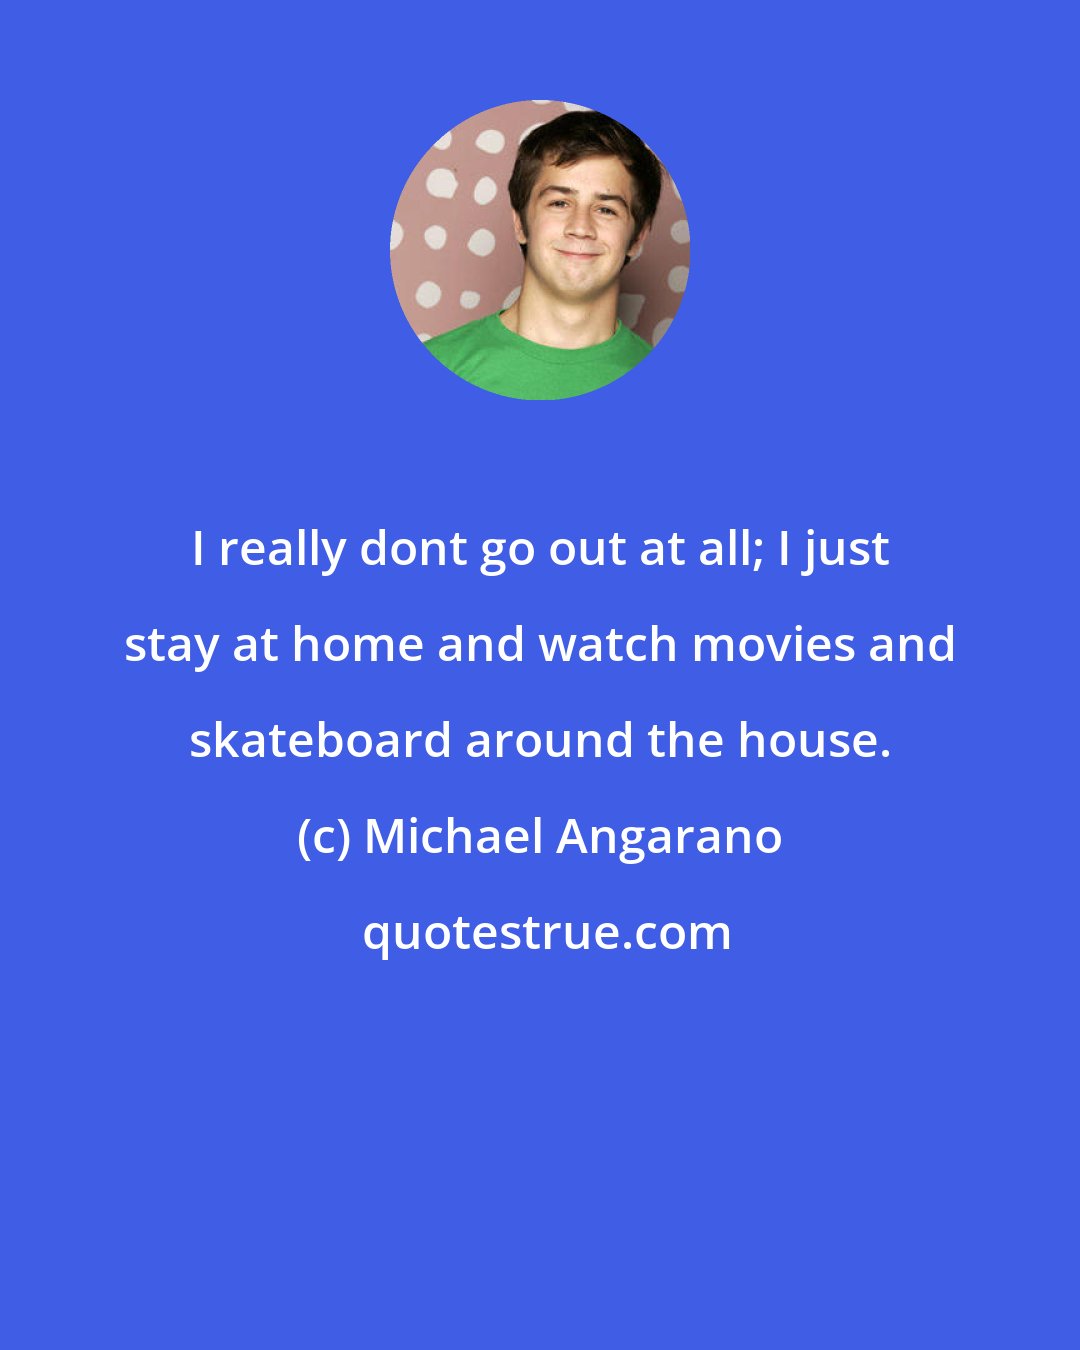 Michael Angarano: I really dont go out at all; I just stay at home and watch movies and skateboard around the house.